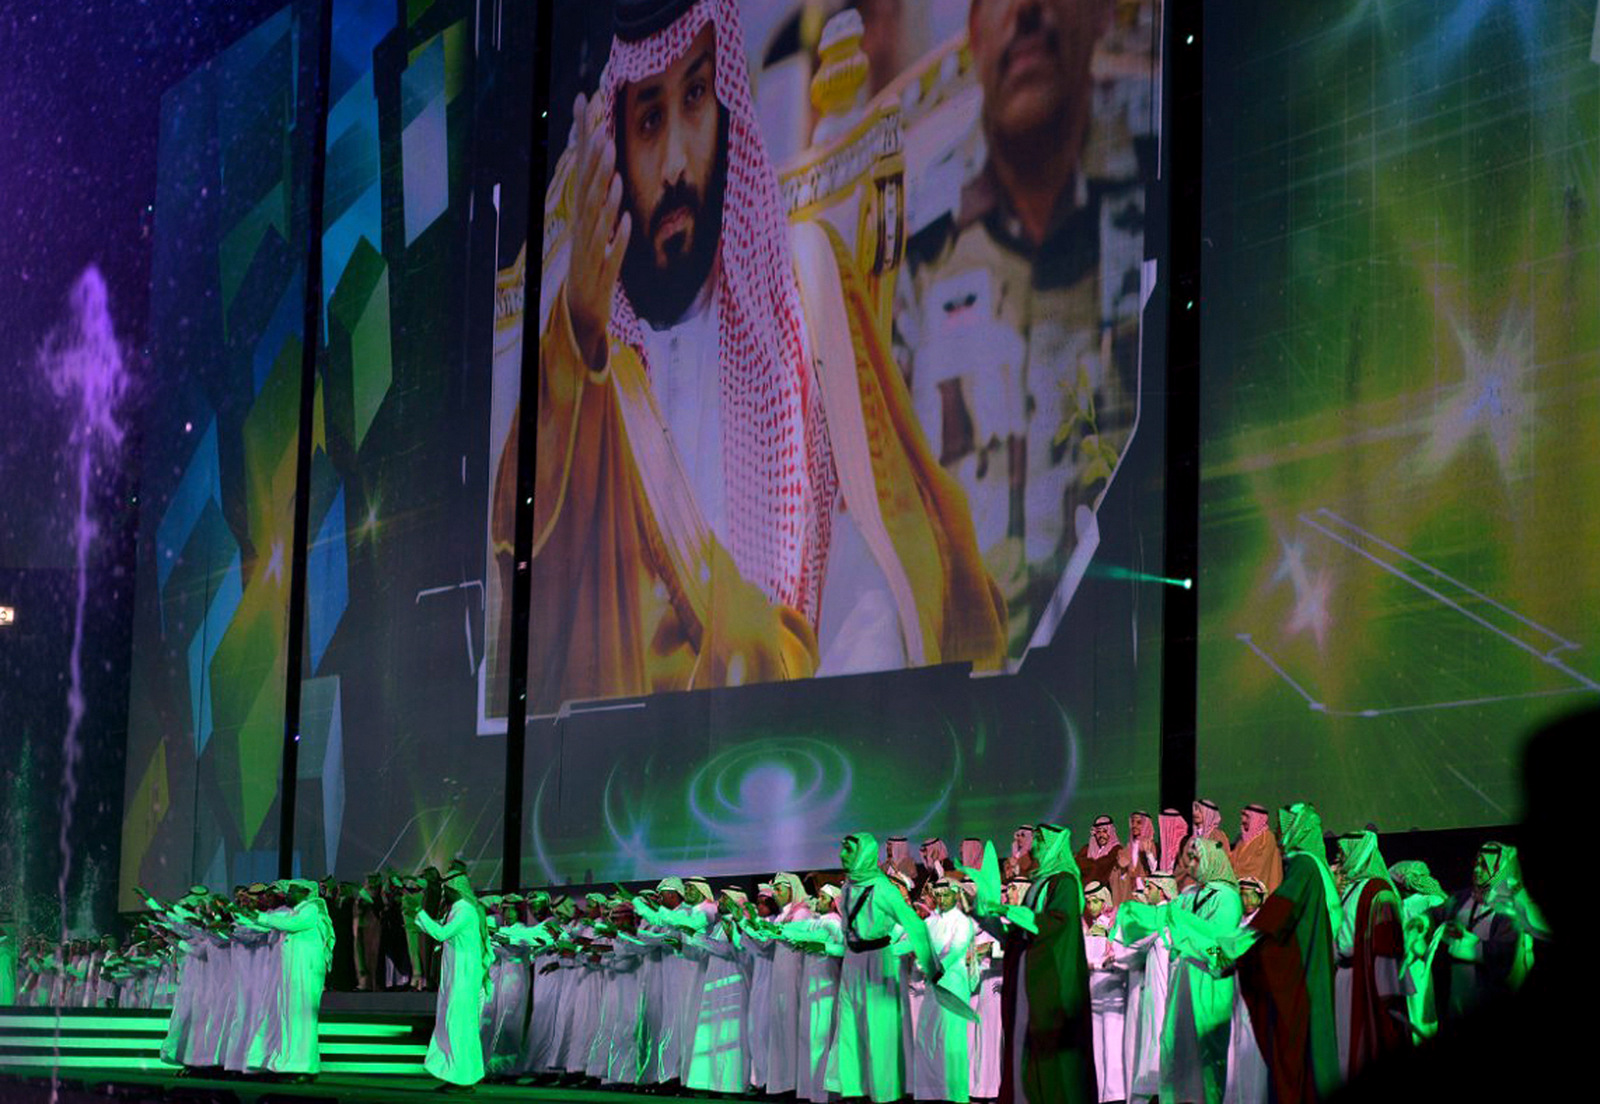 Saudi men perform under a giant screen showing an image of Saudi Crown Prince Mohammed Bin Salman during National Day ceremonies, at the King Fahd Stadium in Riyadh, Saudi Arabia. Saudi Arabia announced on Monday, Dec. 11, 2017 it will allow movie theaters to open in the conservative kingdom next year, for the first time in more than 35 years, in the latest social push by the country’s crown prince, Sept. 23, 2017. (Saudi Press Agency via AP)